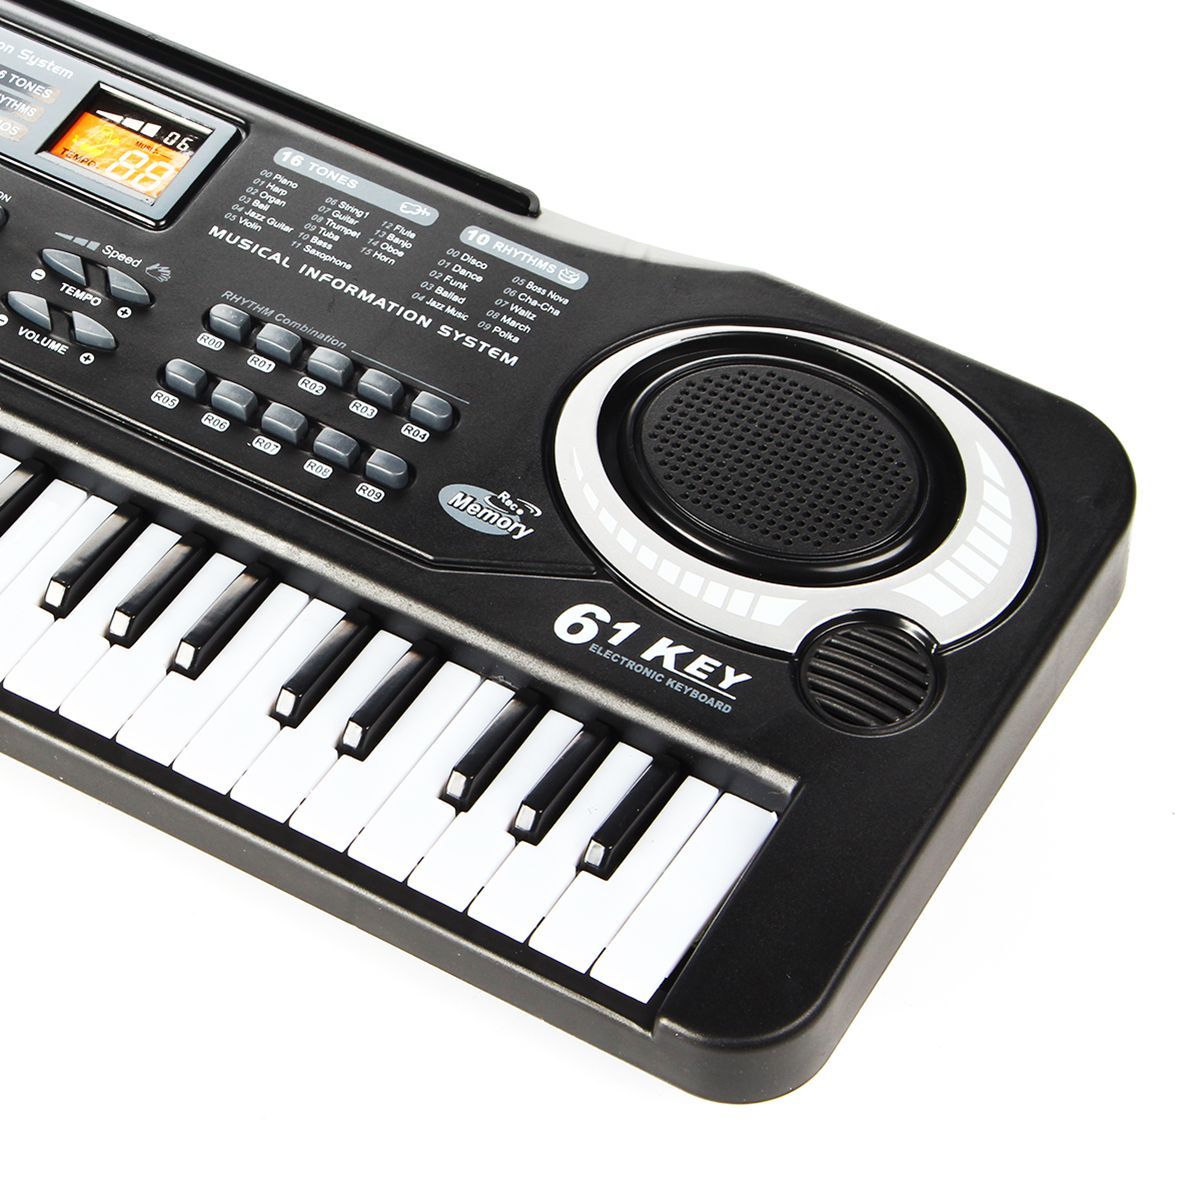 Standard-61-Keys--Children-Electronic-Piano-Keyboard-with-External-Speaker-Microphone-Supports-Singi-1660652